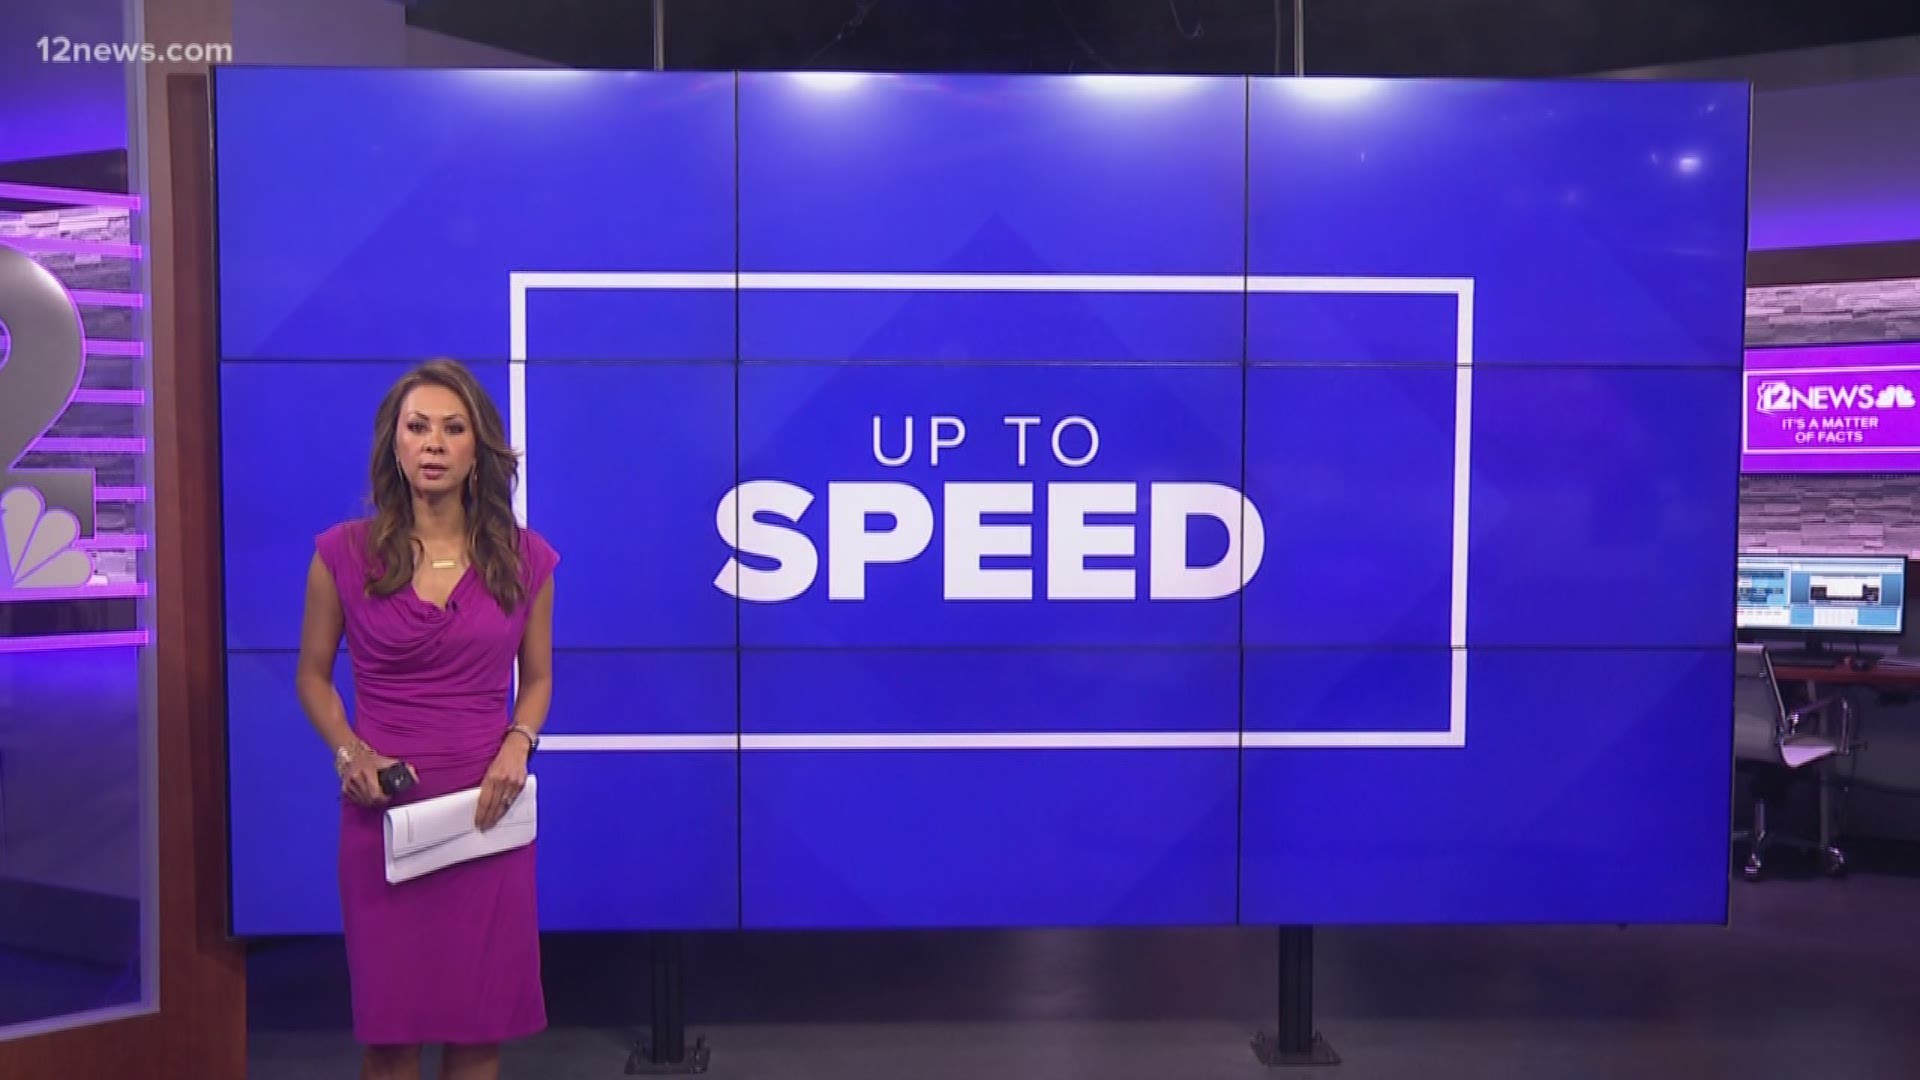 We get you "Up to Speed" on the latest news happening around the Valley and across the country on Friday afternoon.